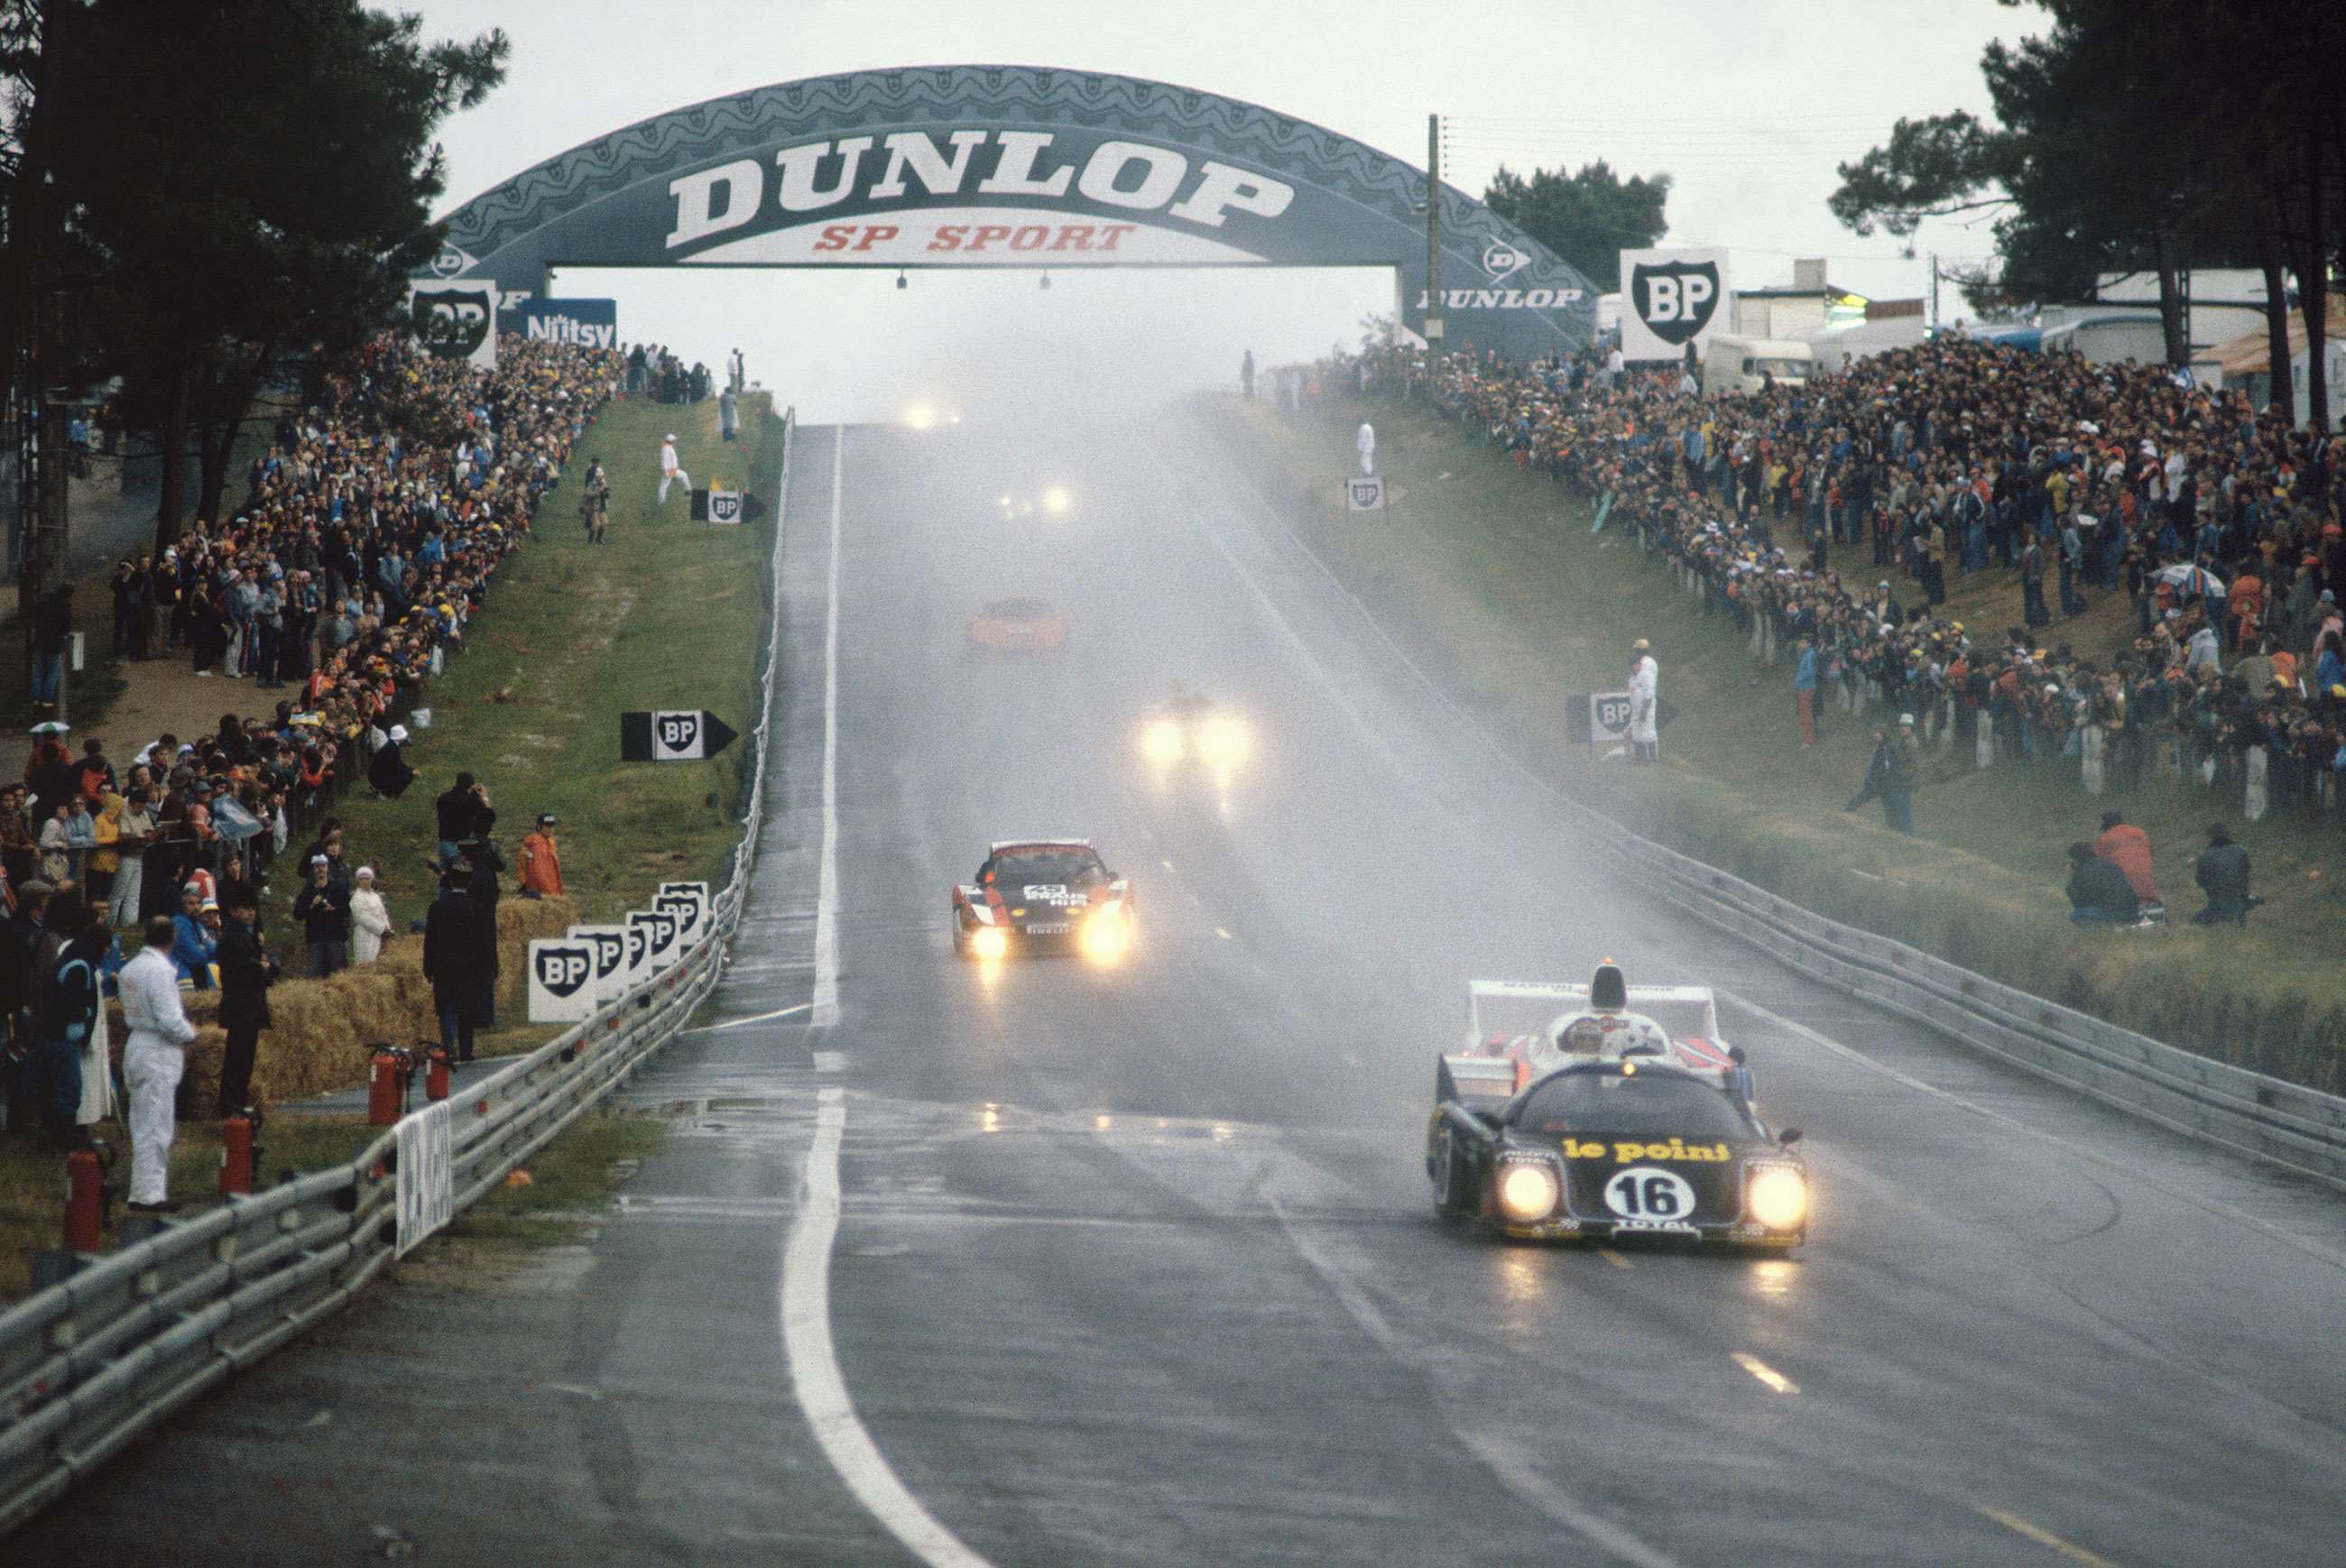 Le Mans, 1980, and the leading Rondeau M379B Ford of Jean Rondeau and Jean-Pierre Jaussaud.